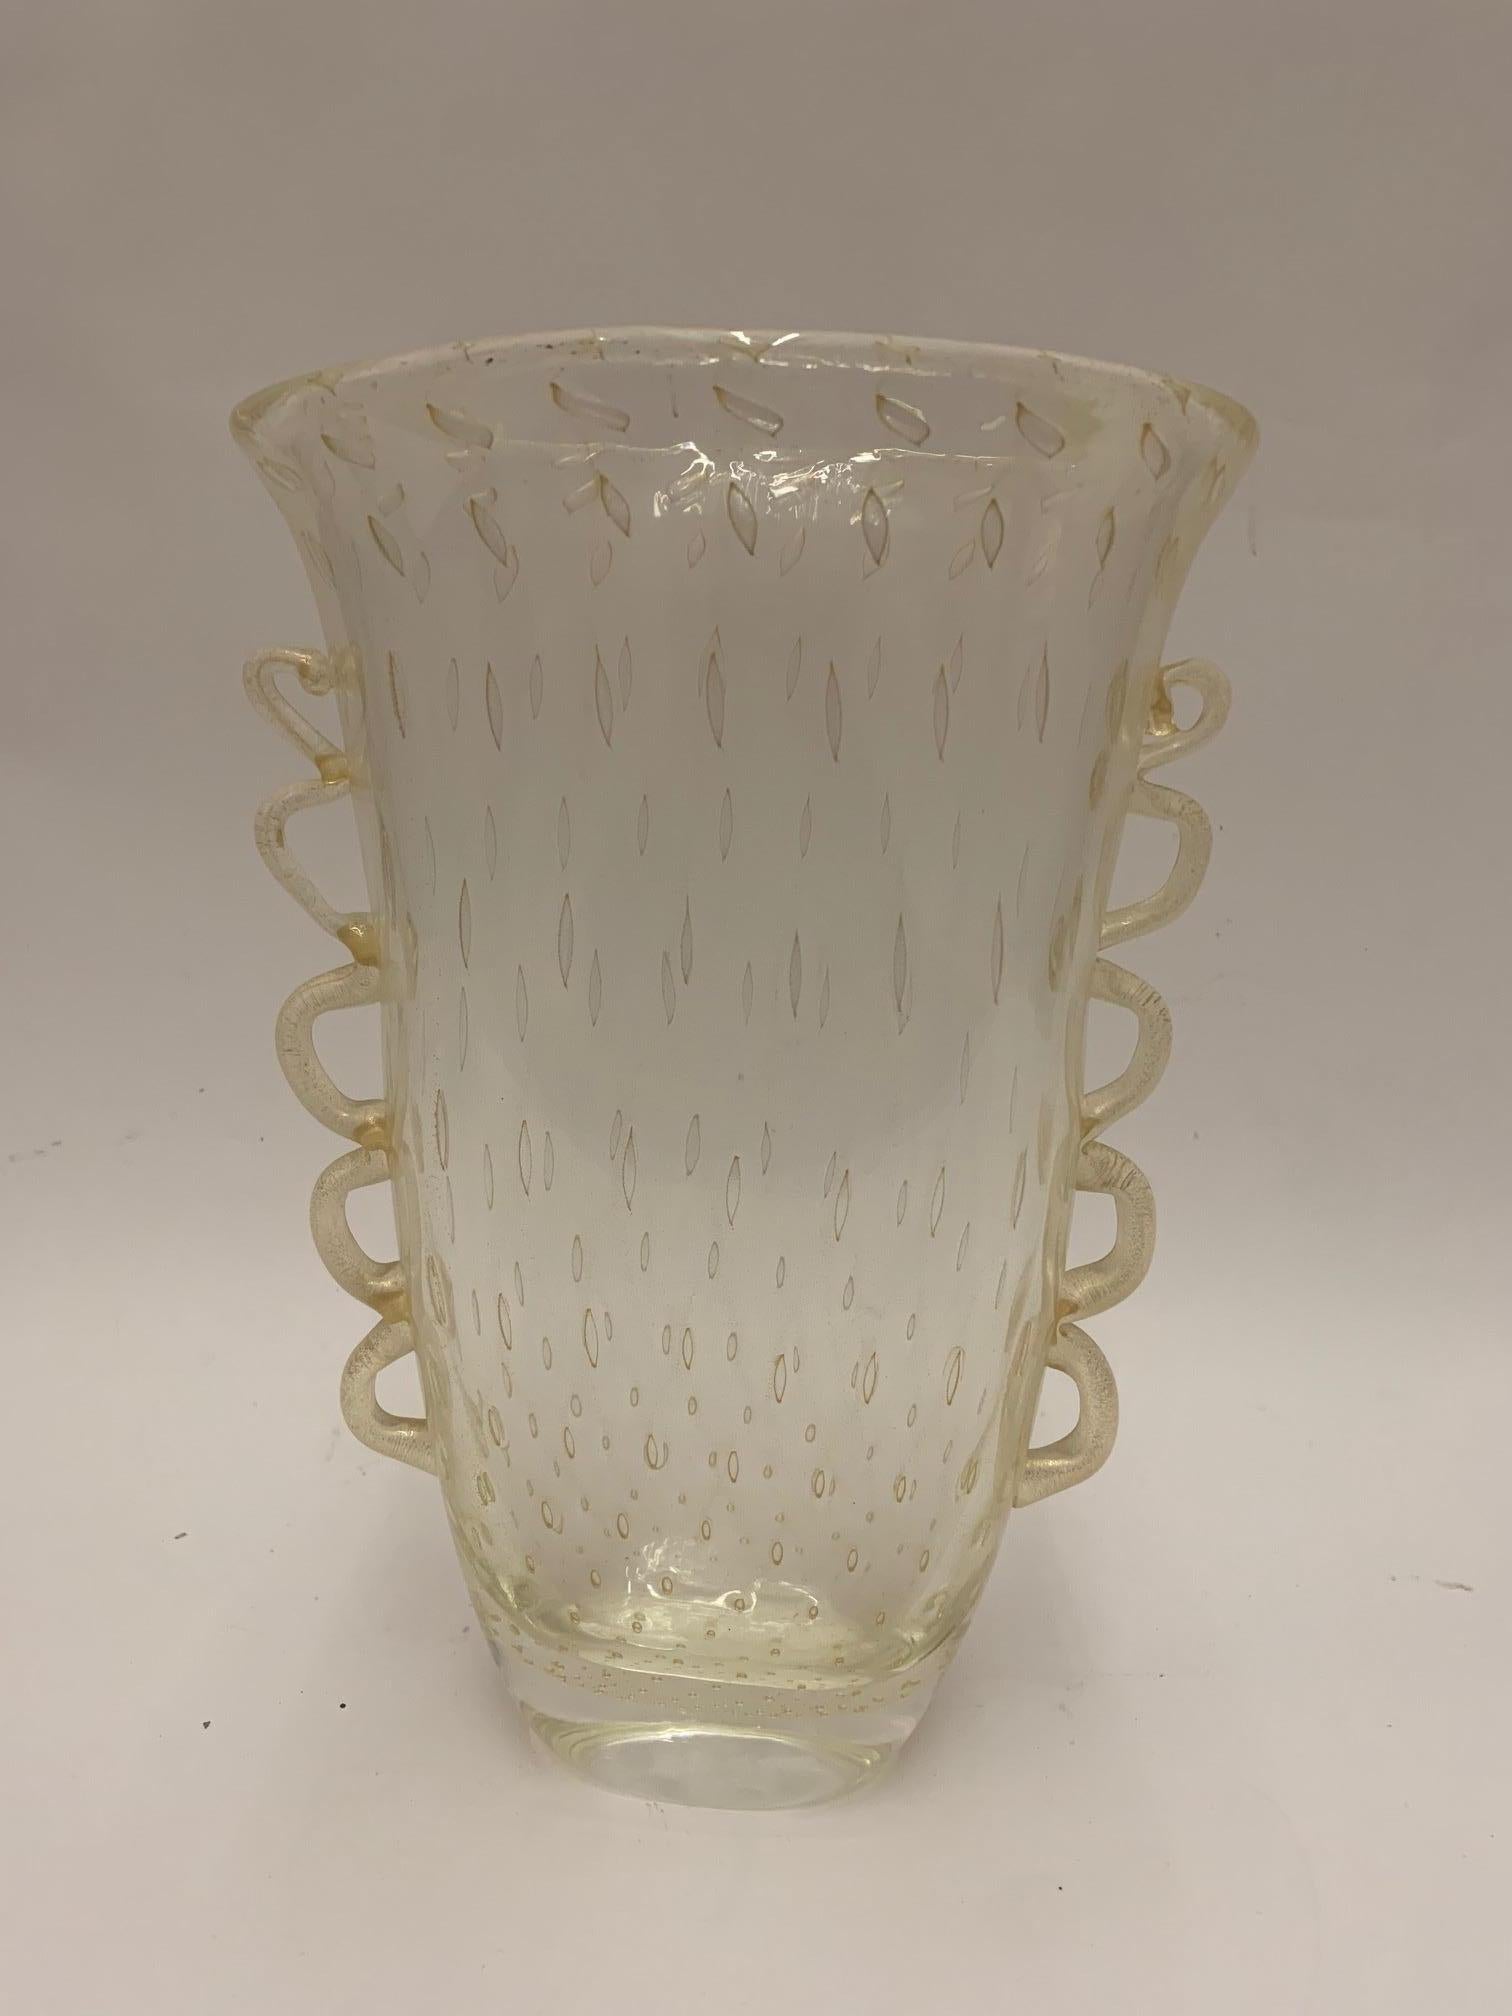 Hand blown Murano glass vase in rare pale yellow hue.

Property from esteemed interior designer Juan Montoya. Juan Montoya is one of the most acclaimed and prolific interior designers in the world today. Juan Montoya was born and spent his early